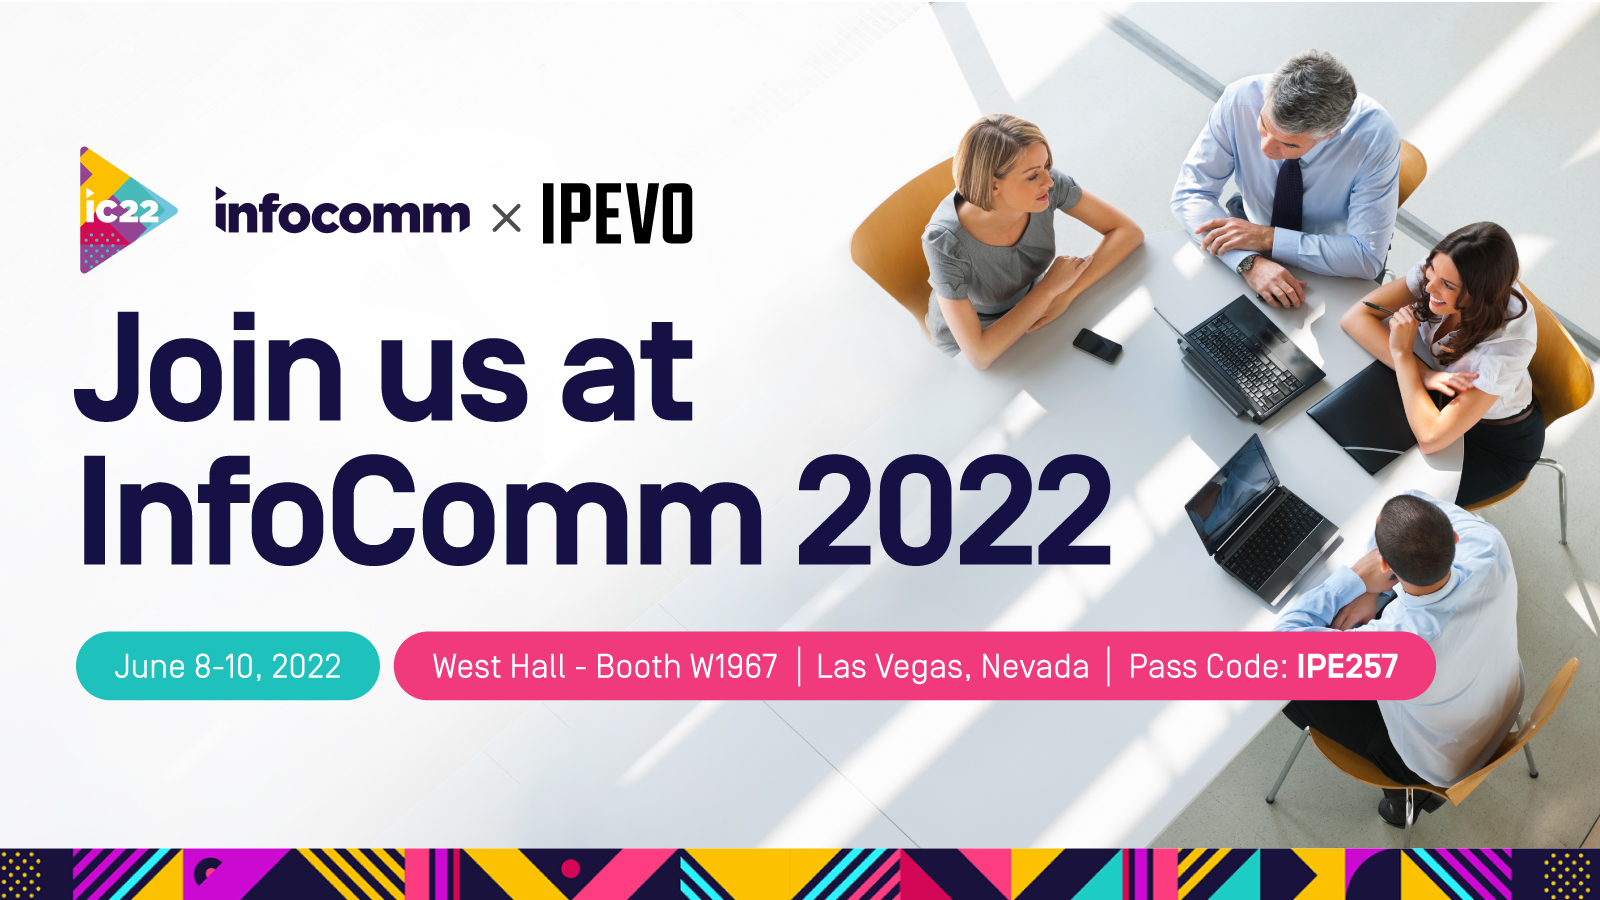 Visit us on June 8-10 at InfoComm 2022, West Hall booth W1967 of the Las Vegas Convention Center in Nevada, USA. Explore our whole new approach to immersive video conferencing and smart digital learning.